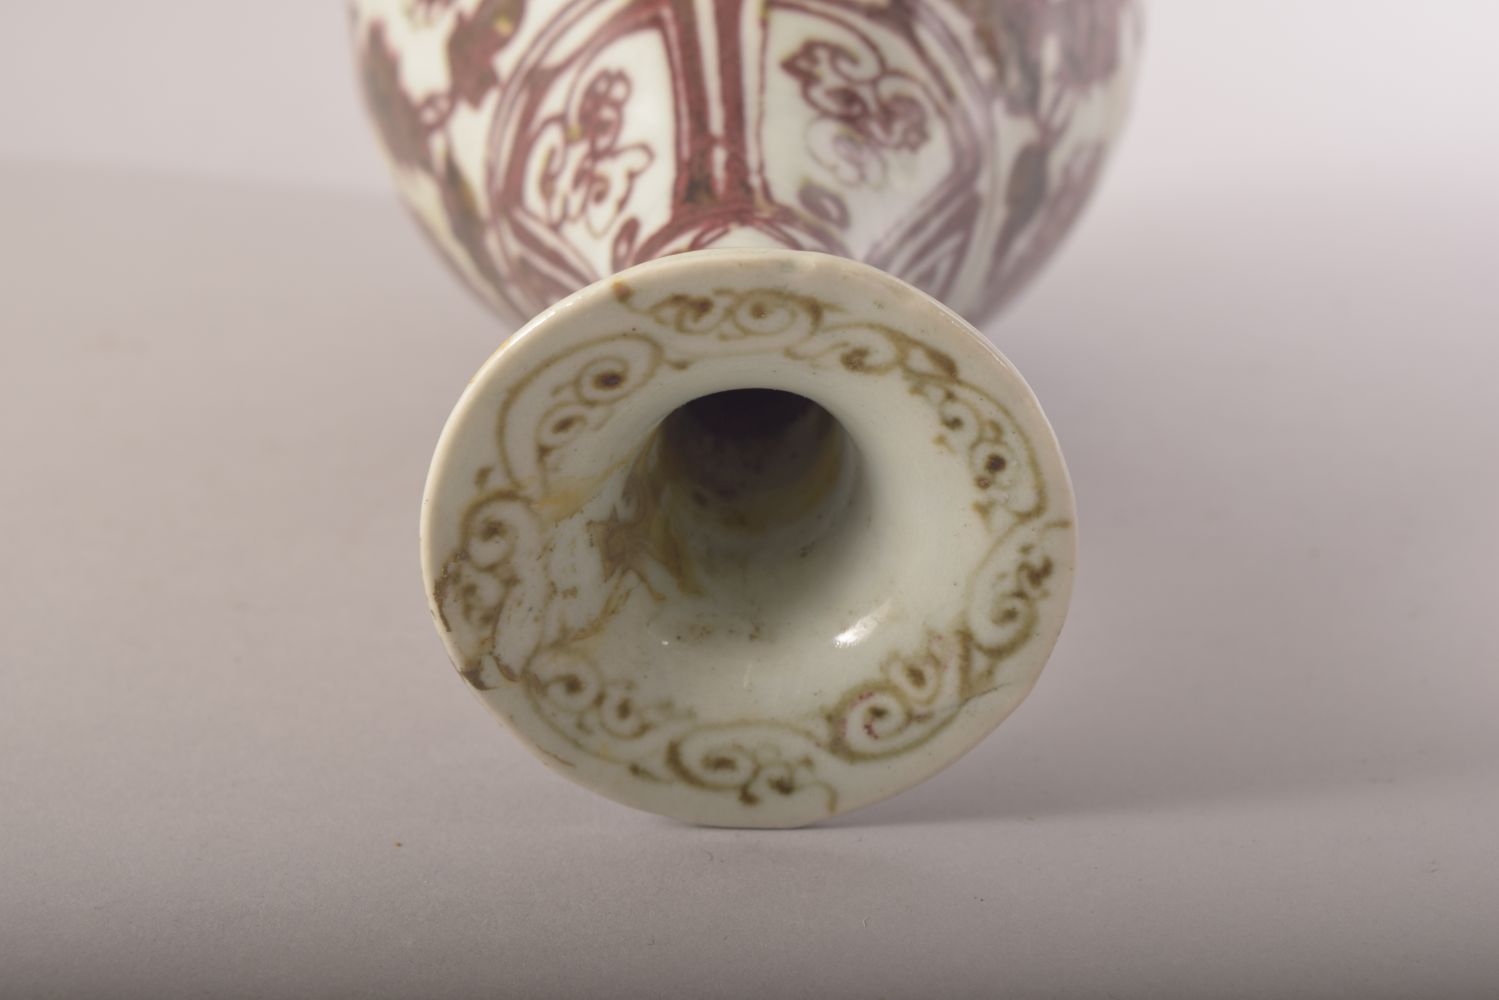 A CHINESE IRON RED AND WHITE GLAZED POTTERY VASE, decorated with floral motifs, 24.5cm high. - Image 5 of 6